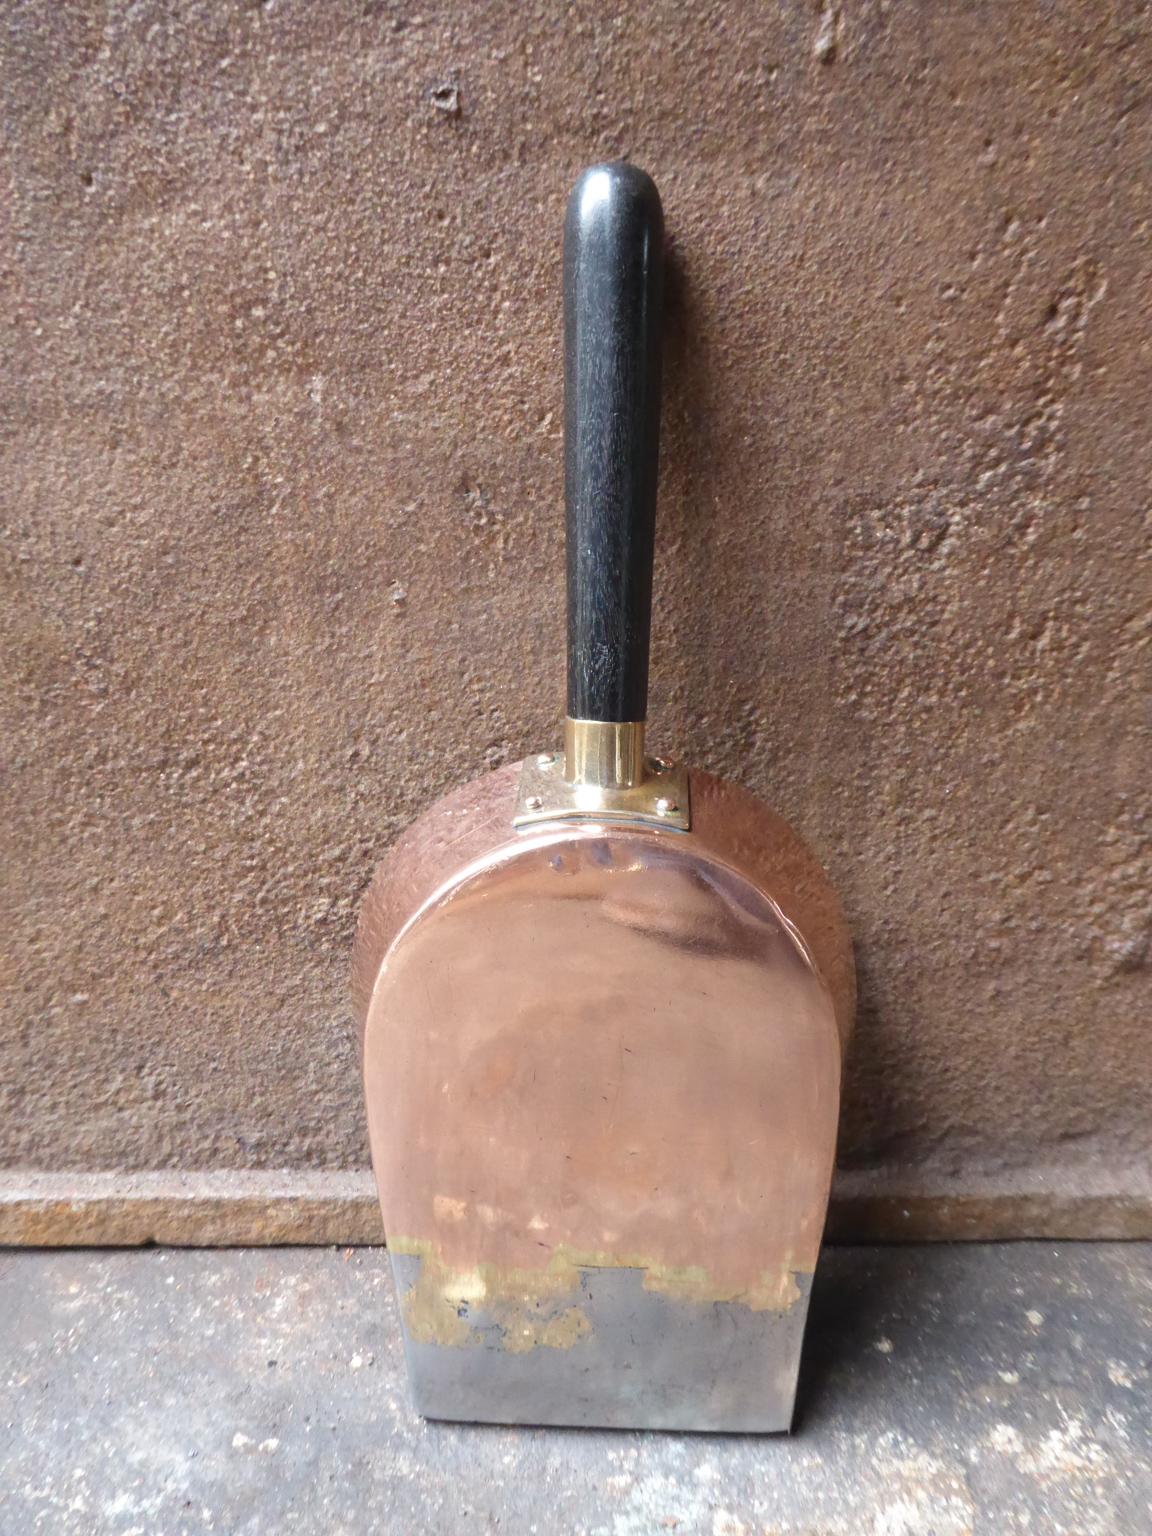 19th century English Georgian fireplace shovel made of polished steel, polished brass, polished copper and wood.